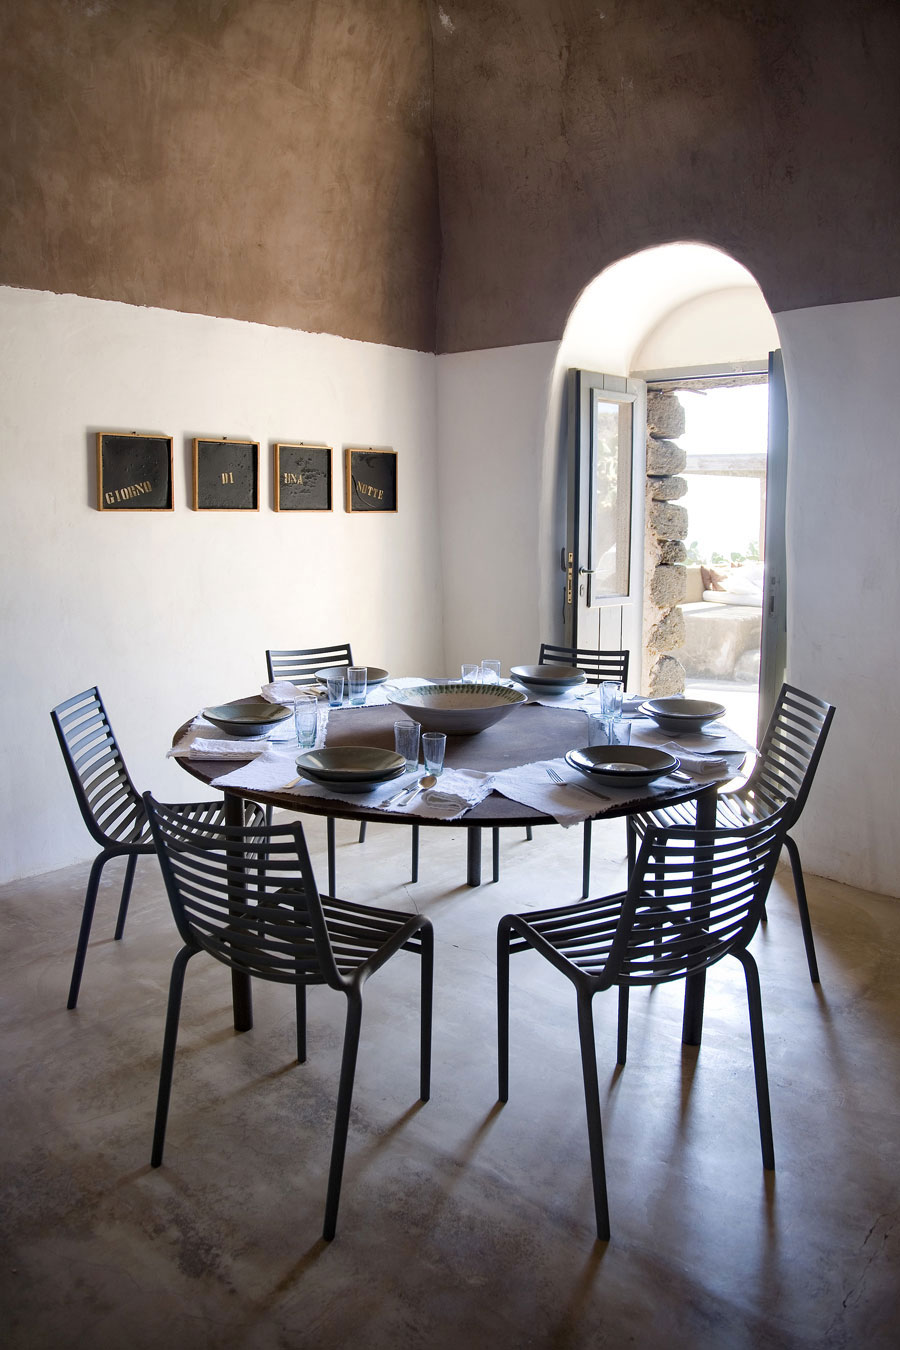 Dining SpaceLiving Space, Casa Albanese, Island of Pantelleria, Italy by ASA Studio Albanese